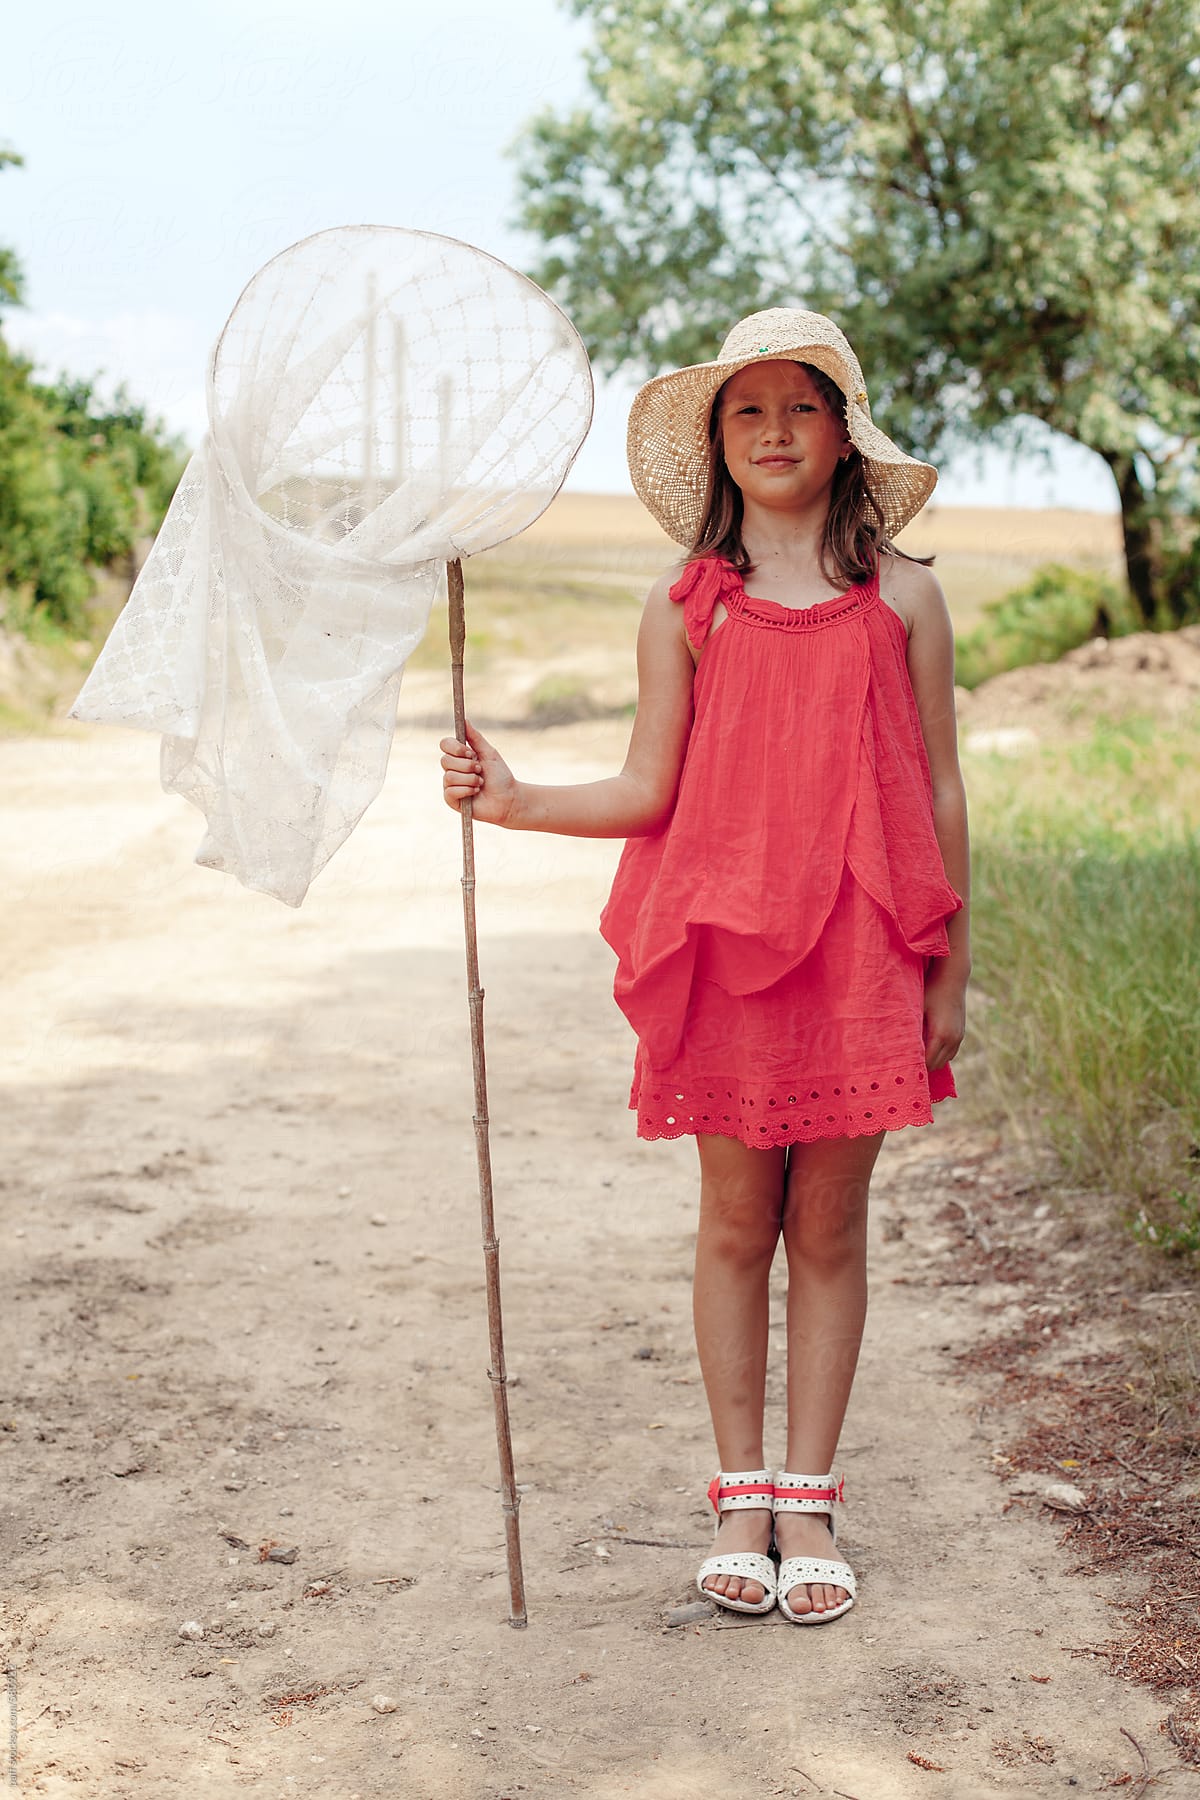 Little Girl With Red Dress Holding A Bug Catching Net by Stocksy  Contributor Paff - Stocksy